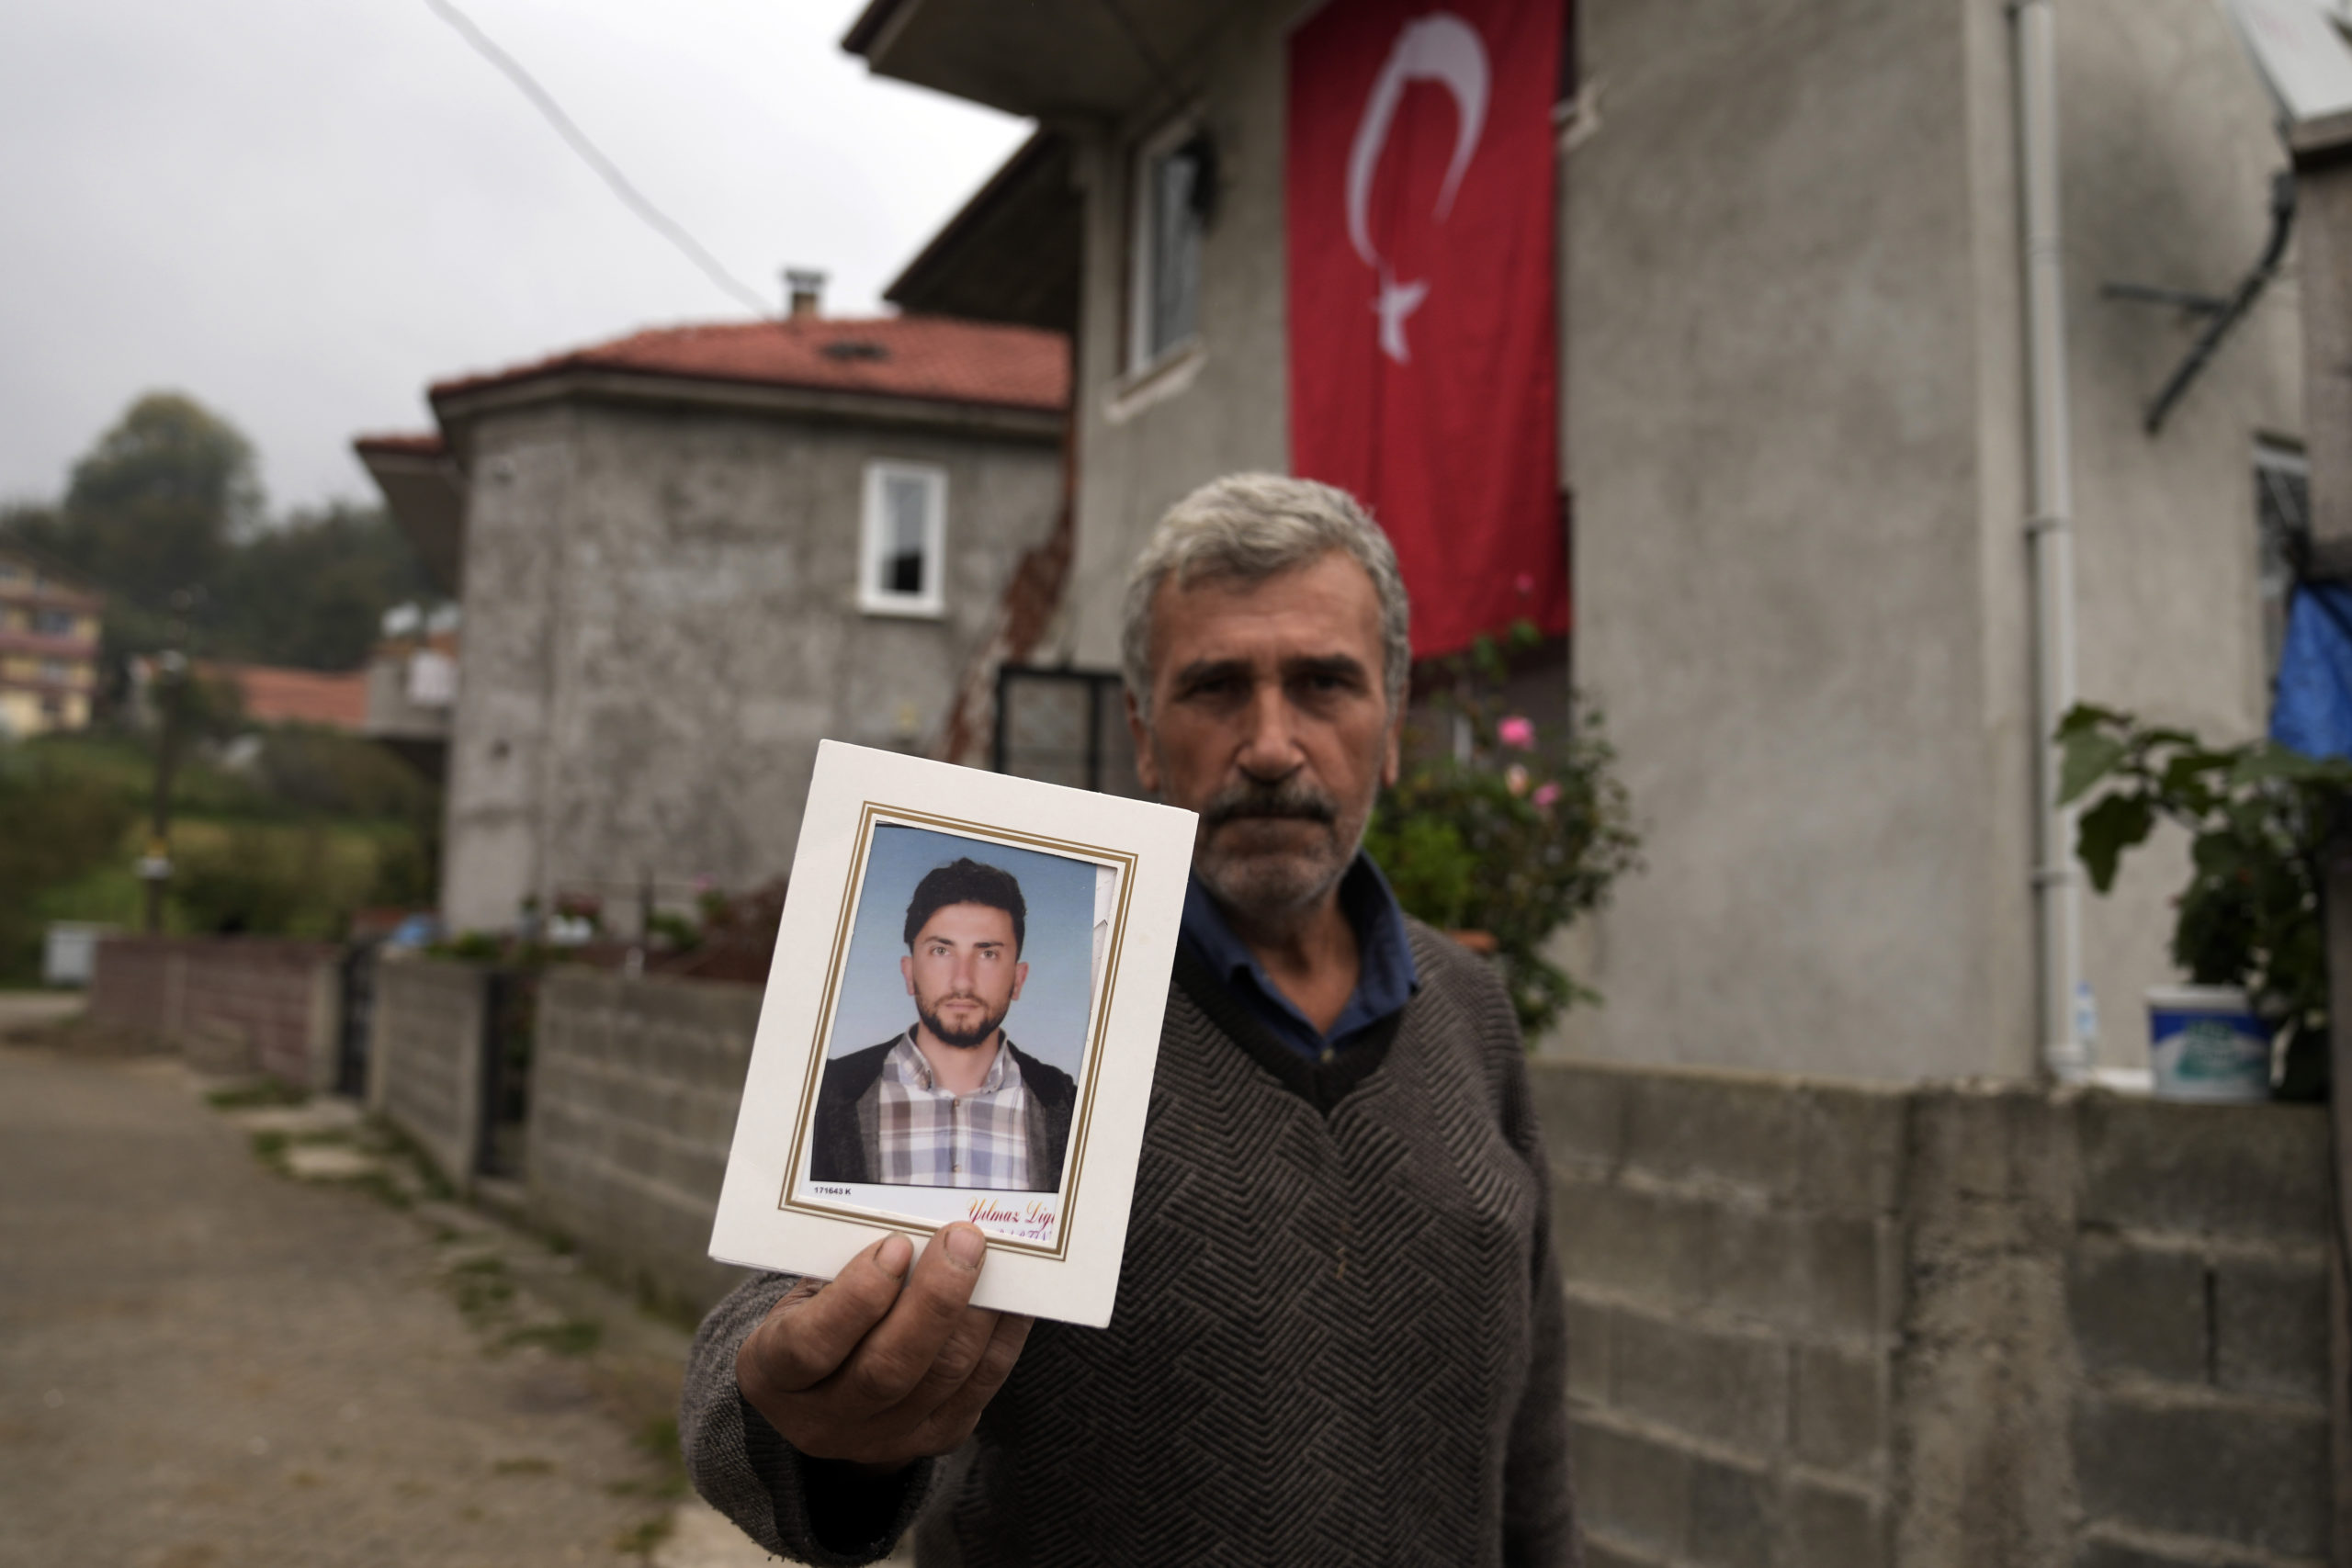 Recep Ayvaz, 62, shows a picture of his son, Selcuk Ayvaz, 33, one of the miners killed in a coal mine explosion, in front of his house in Amasra, in the Black Sea coastal province of Bartin, Turkey on Sunday.